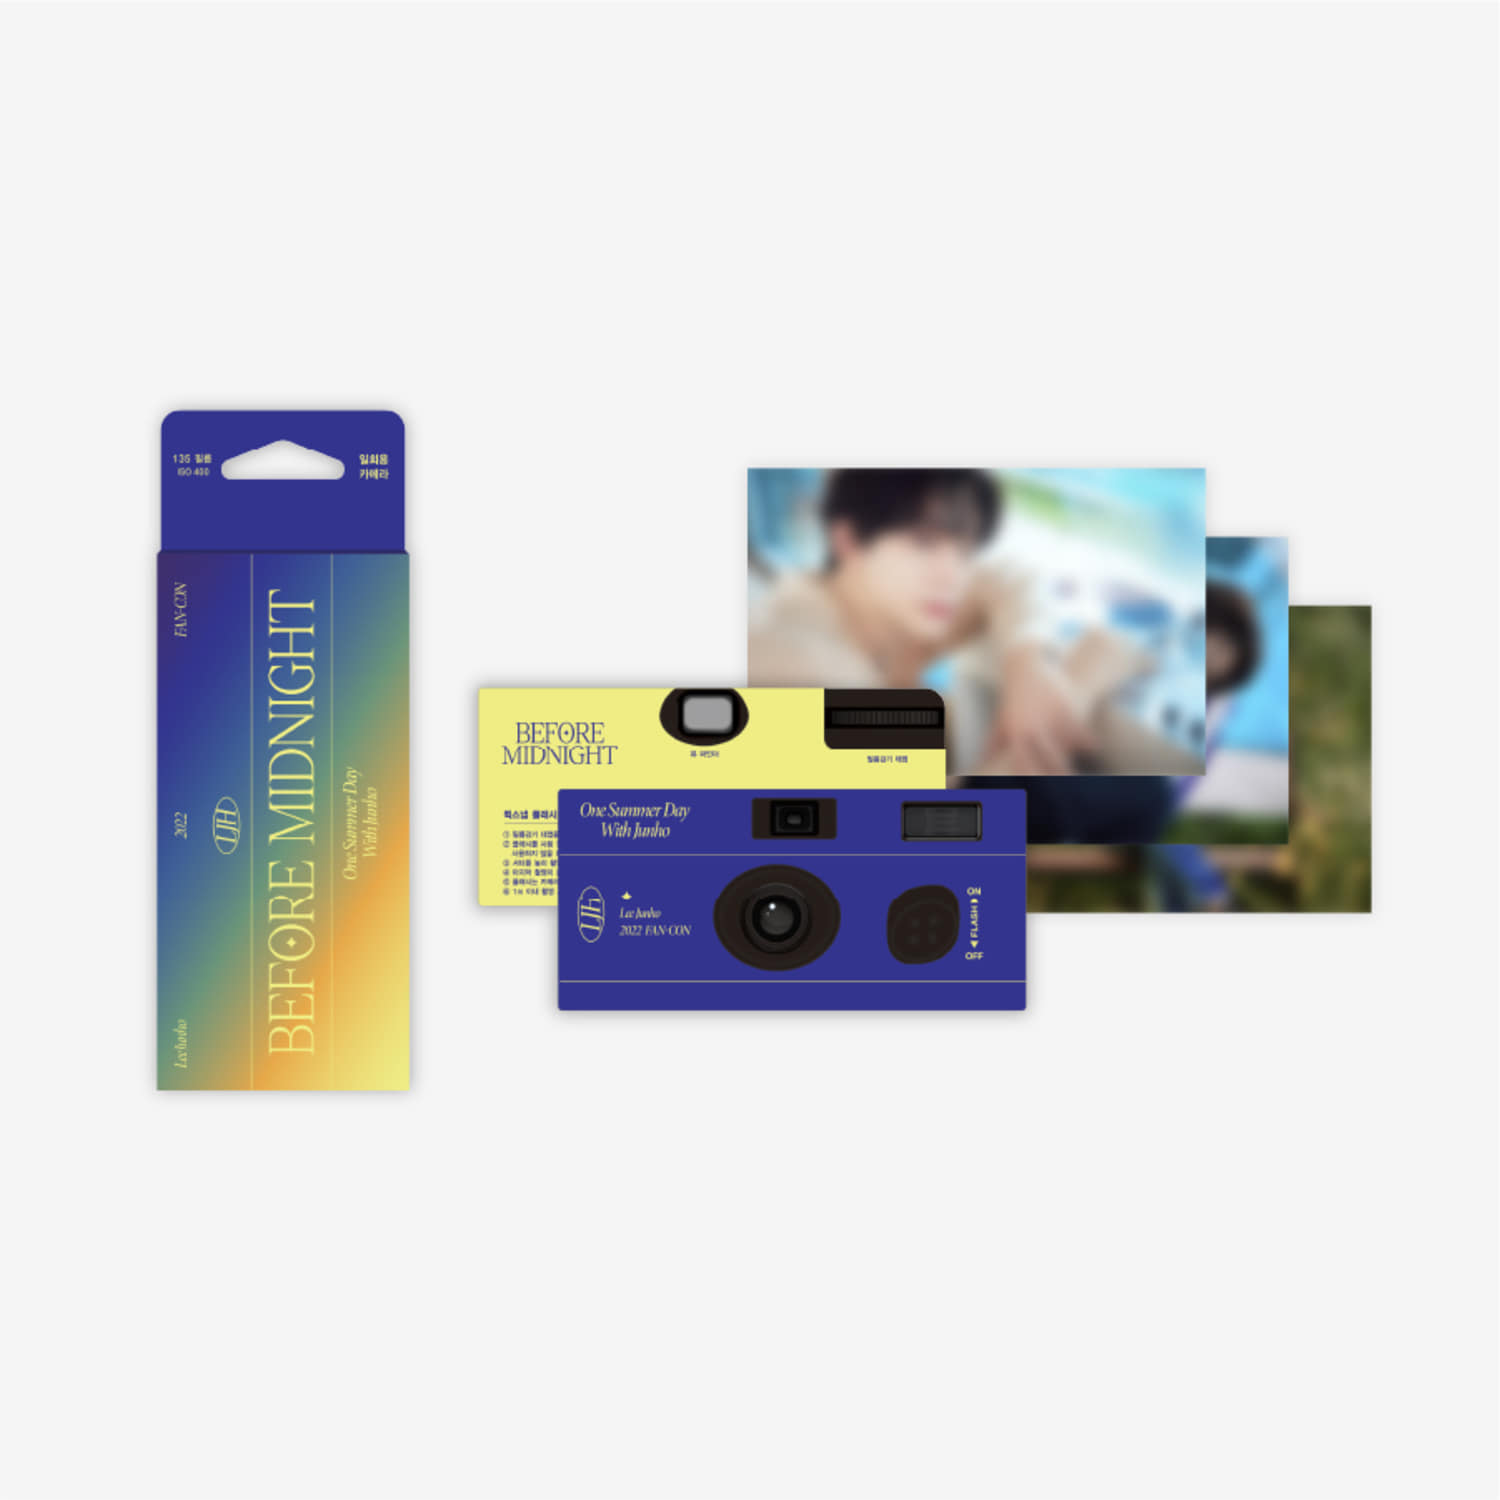 2PM 이준호(LEE JUNHO) [BEFORE MIDNIGHT] OFFICIAL MD - 디자인 퀵 스냅 DESIGN QUICK SNAP - SINGLE USE CAMERAS